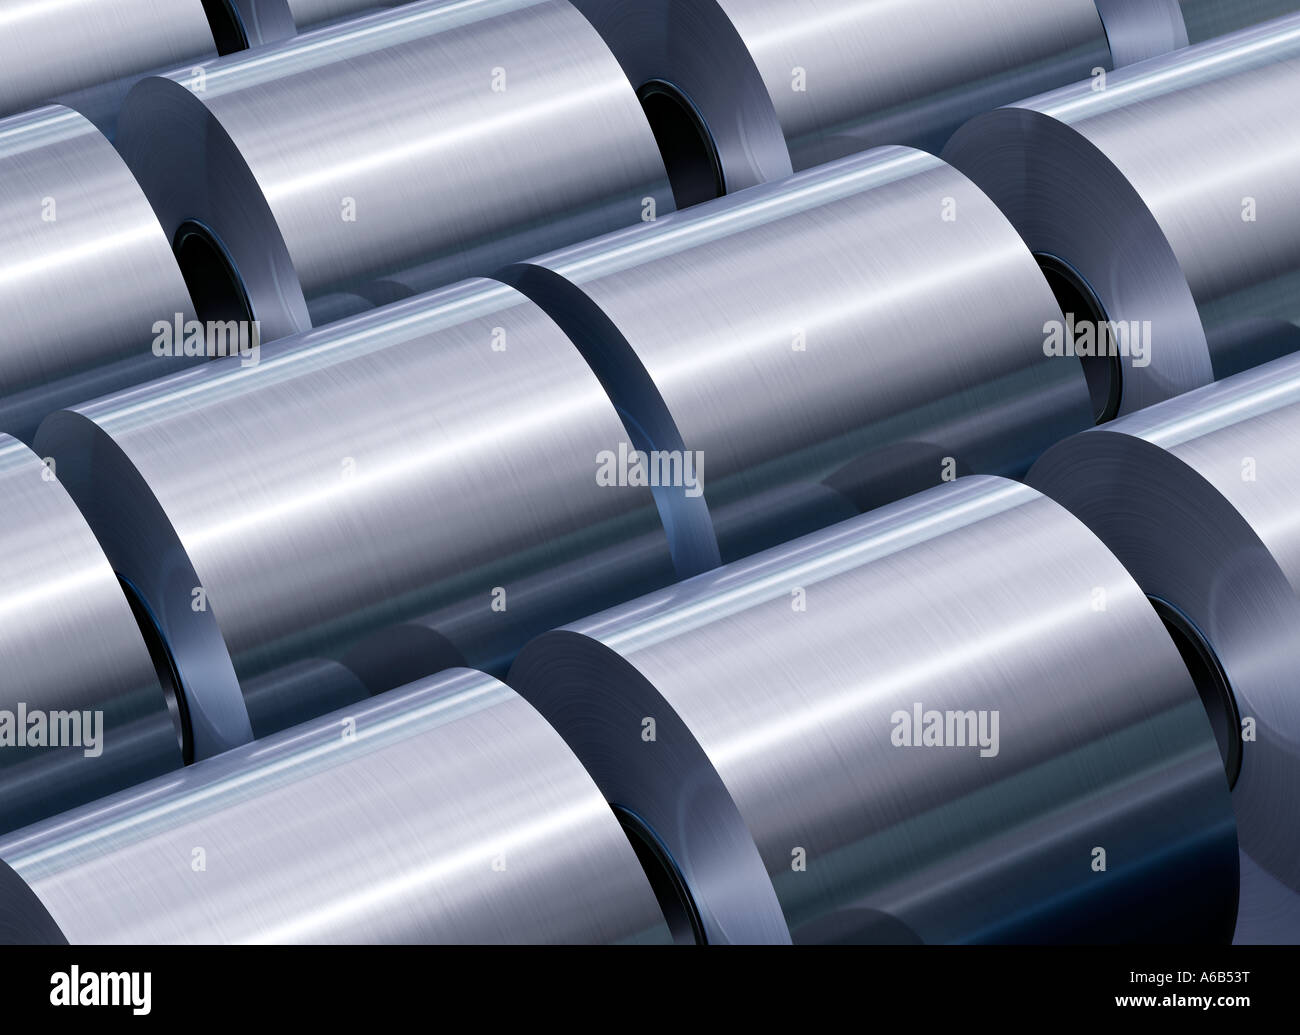 coils of steel sheet steel symbol of iron material steel production steel group Stock Photo